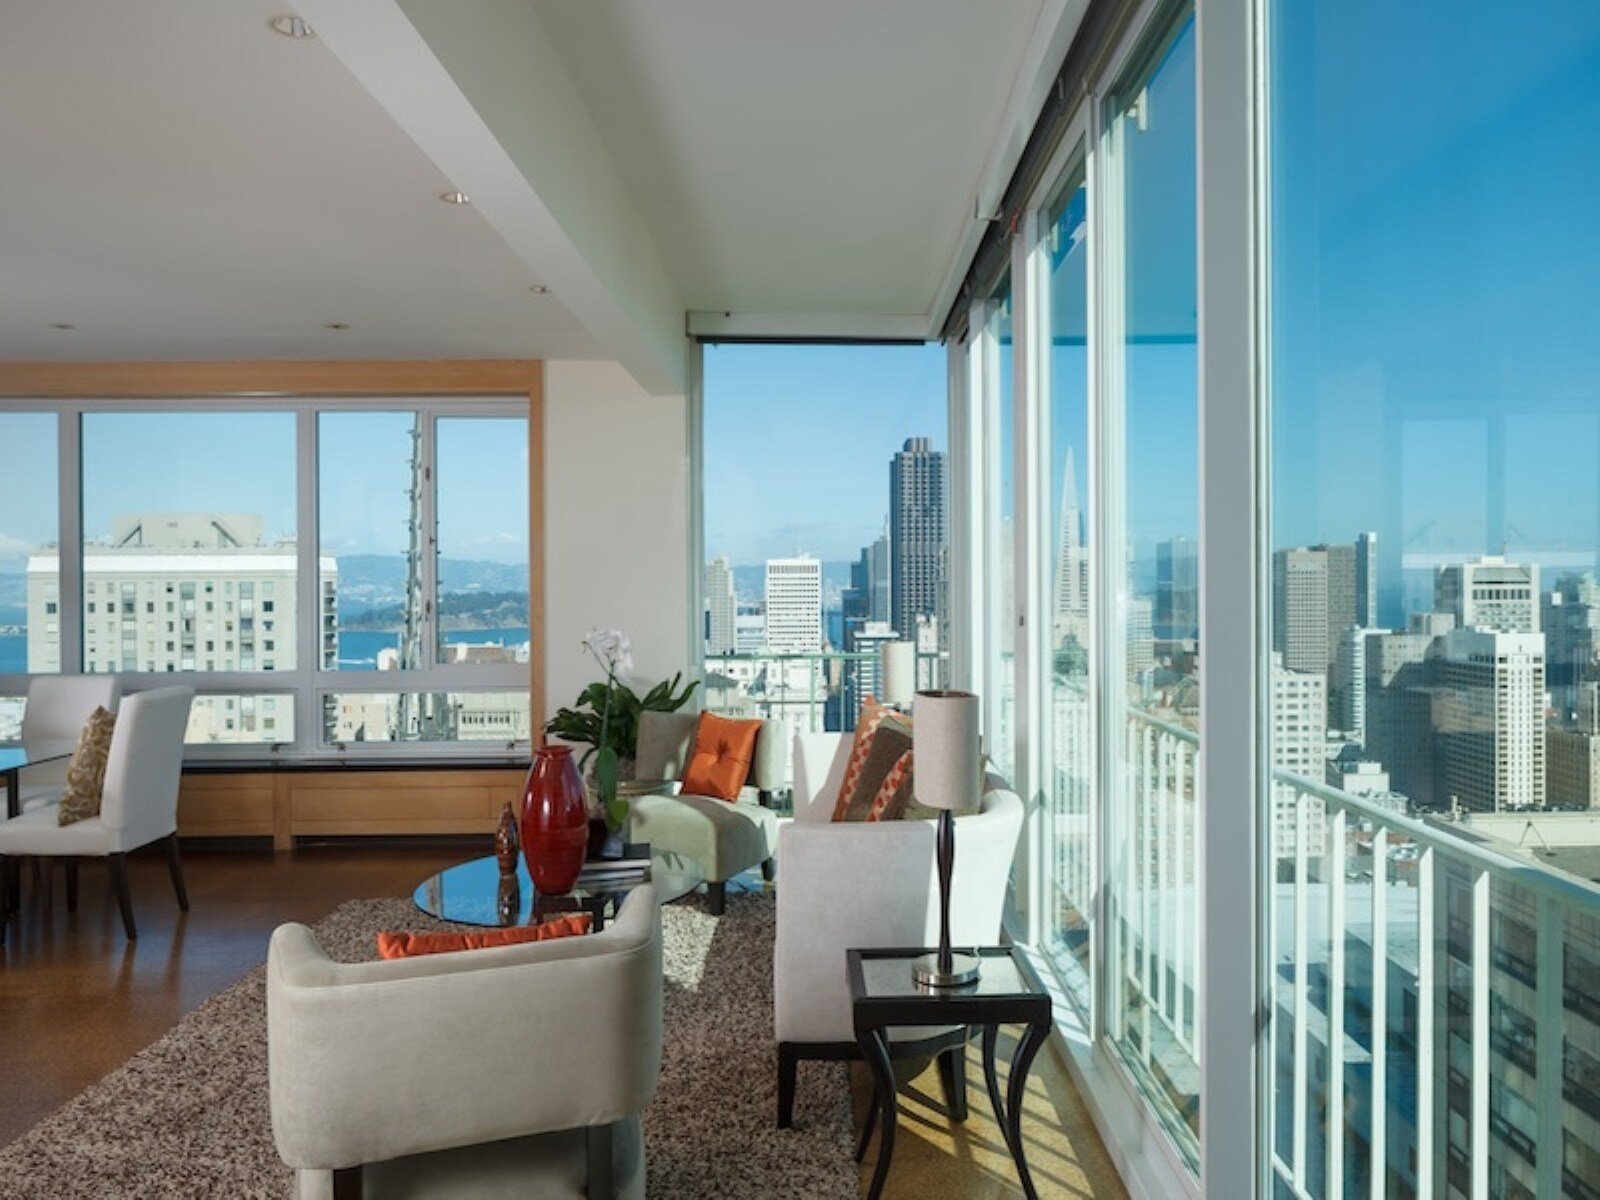 Nob Hill Condo with majestic view over the city of San Francisco (1)